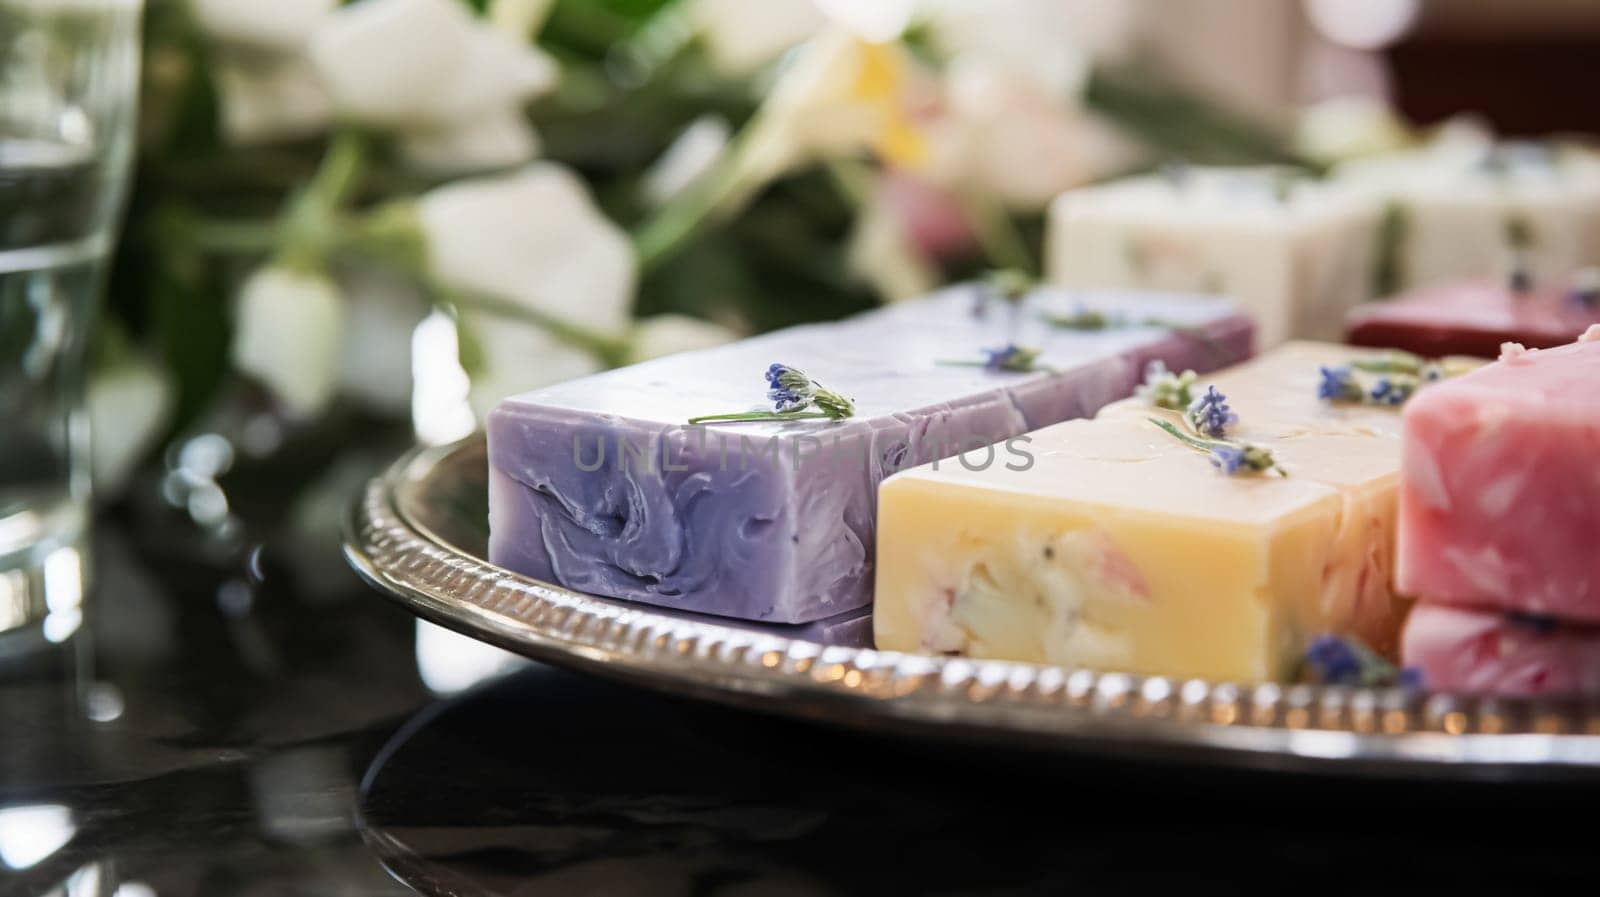 Bespoke homemade soap with floral scent